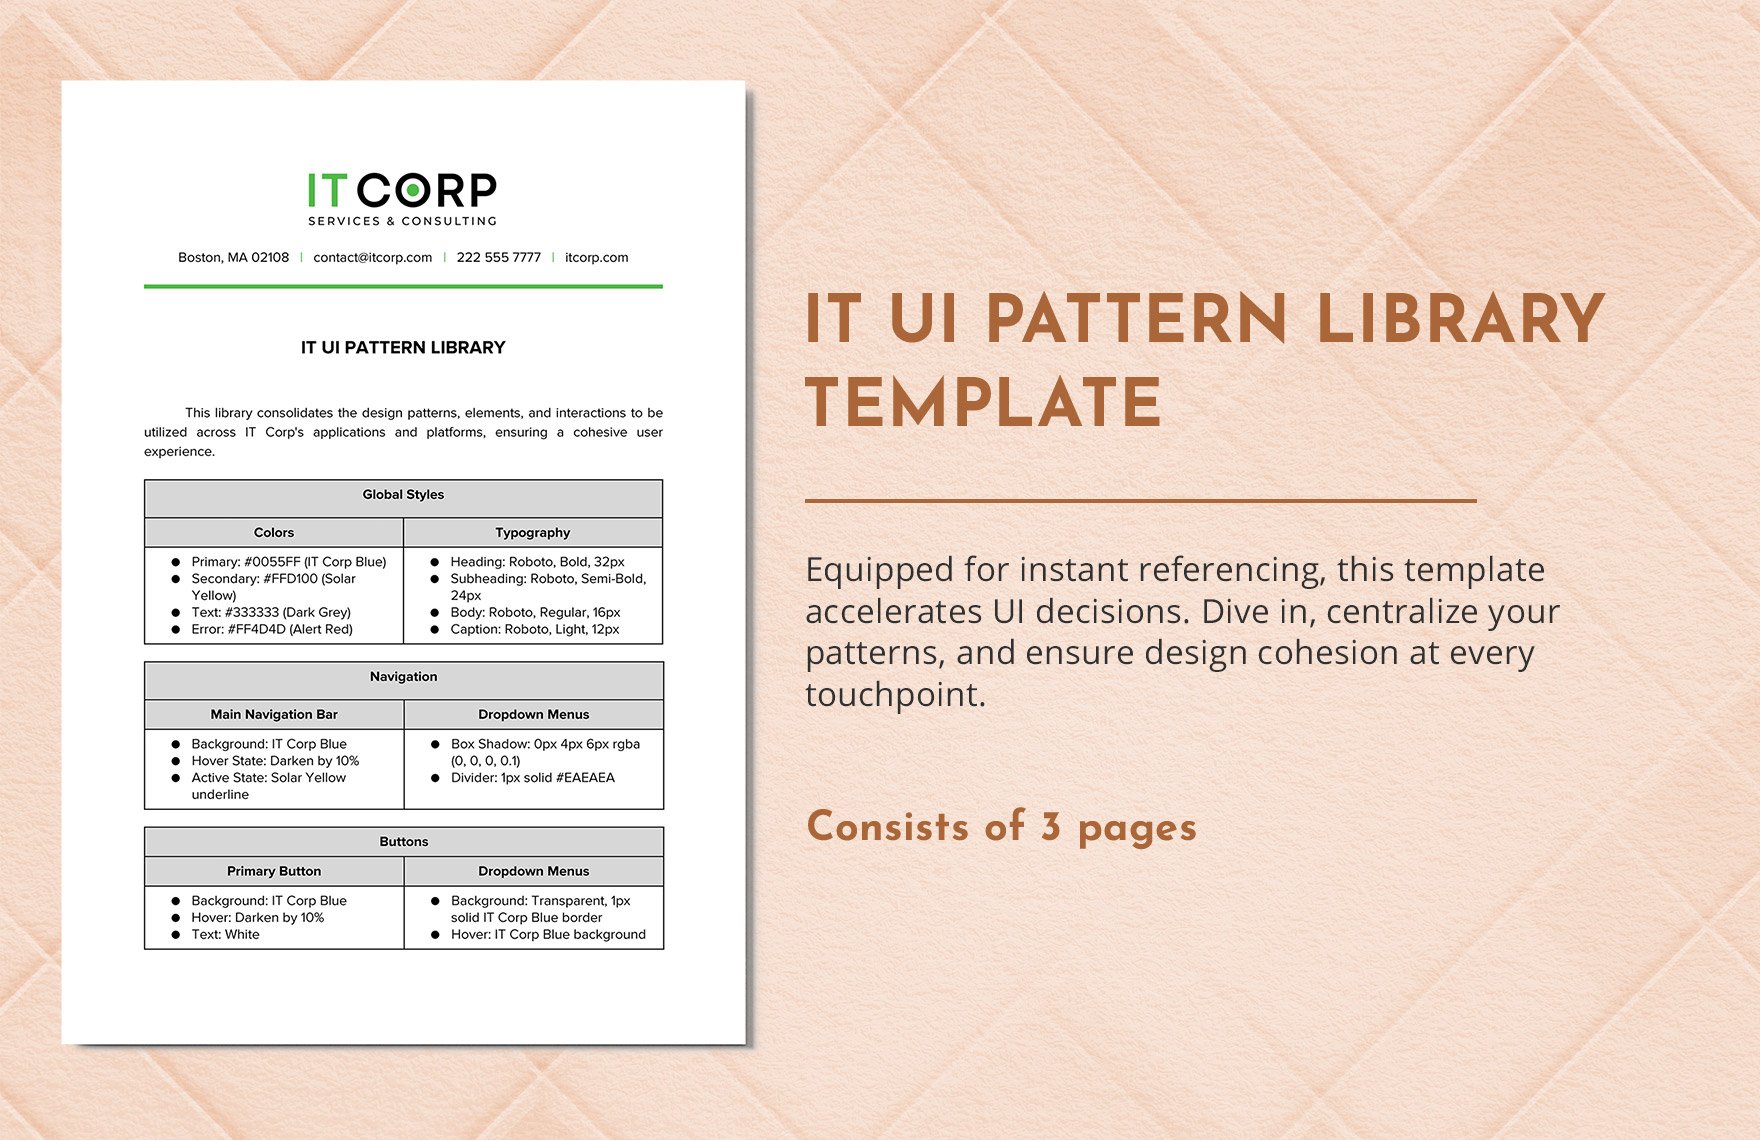 IT UI Pattern Library Template